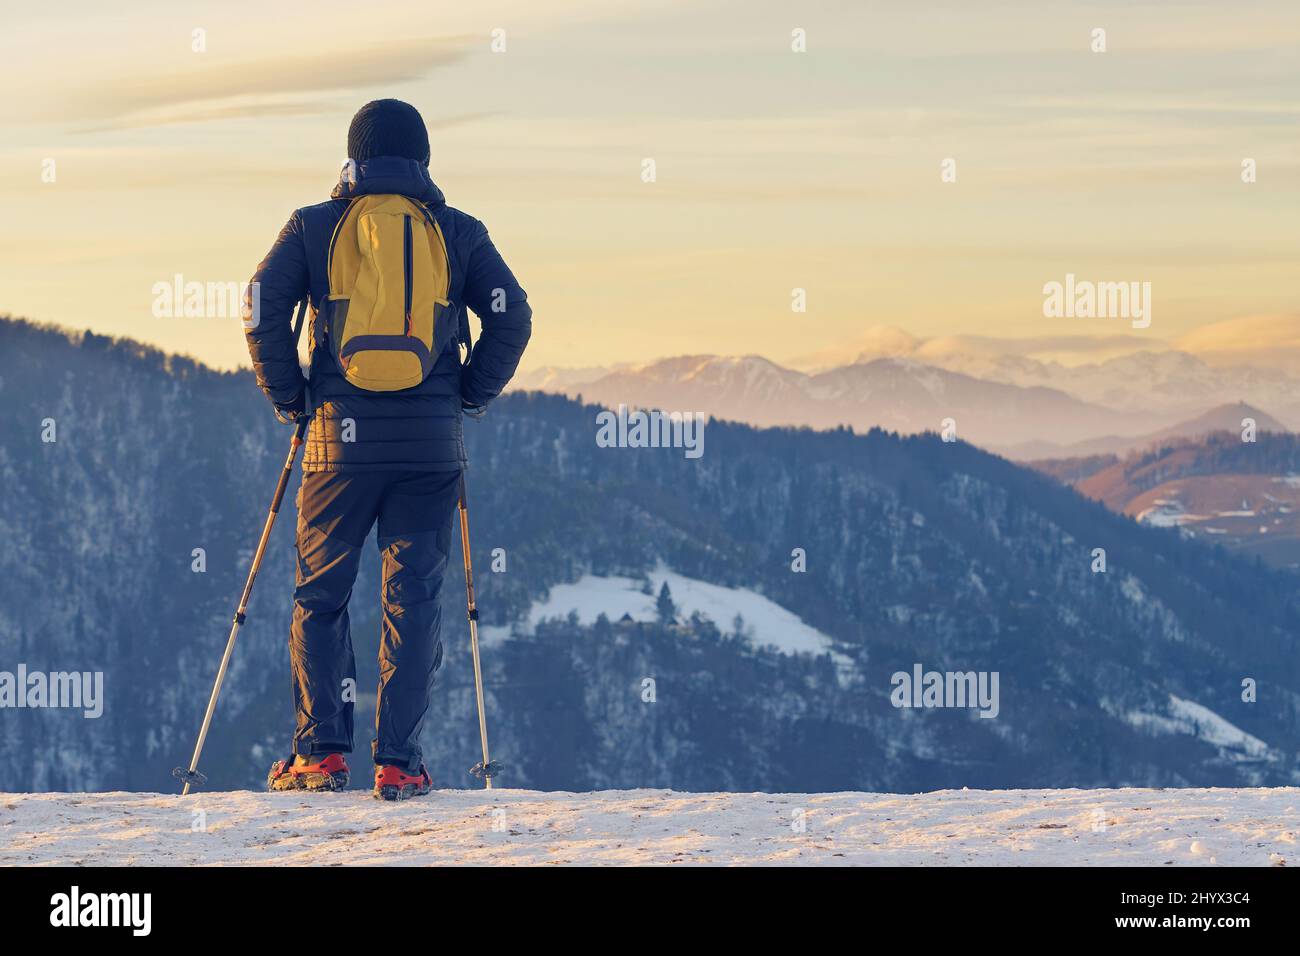 Hiker in snow gear enjoying the view of winter landscape at sunset time Stock Photo